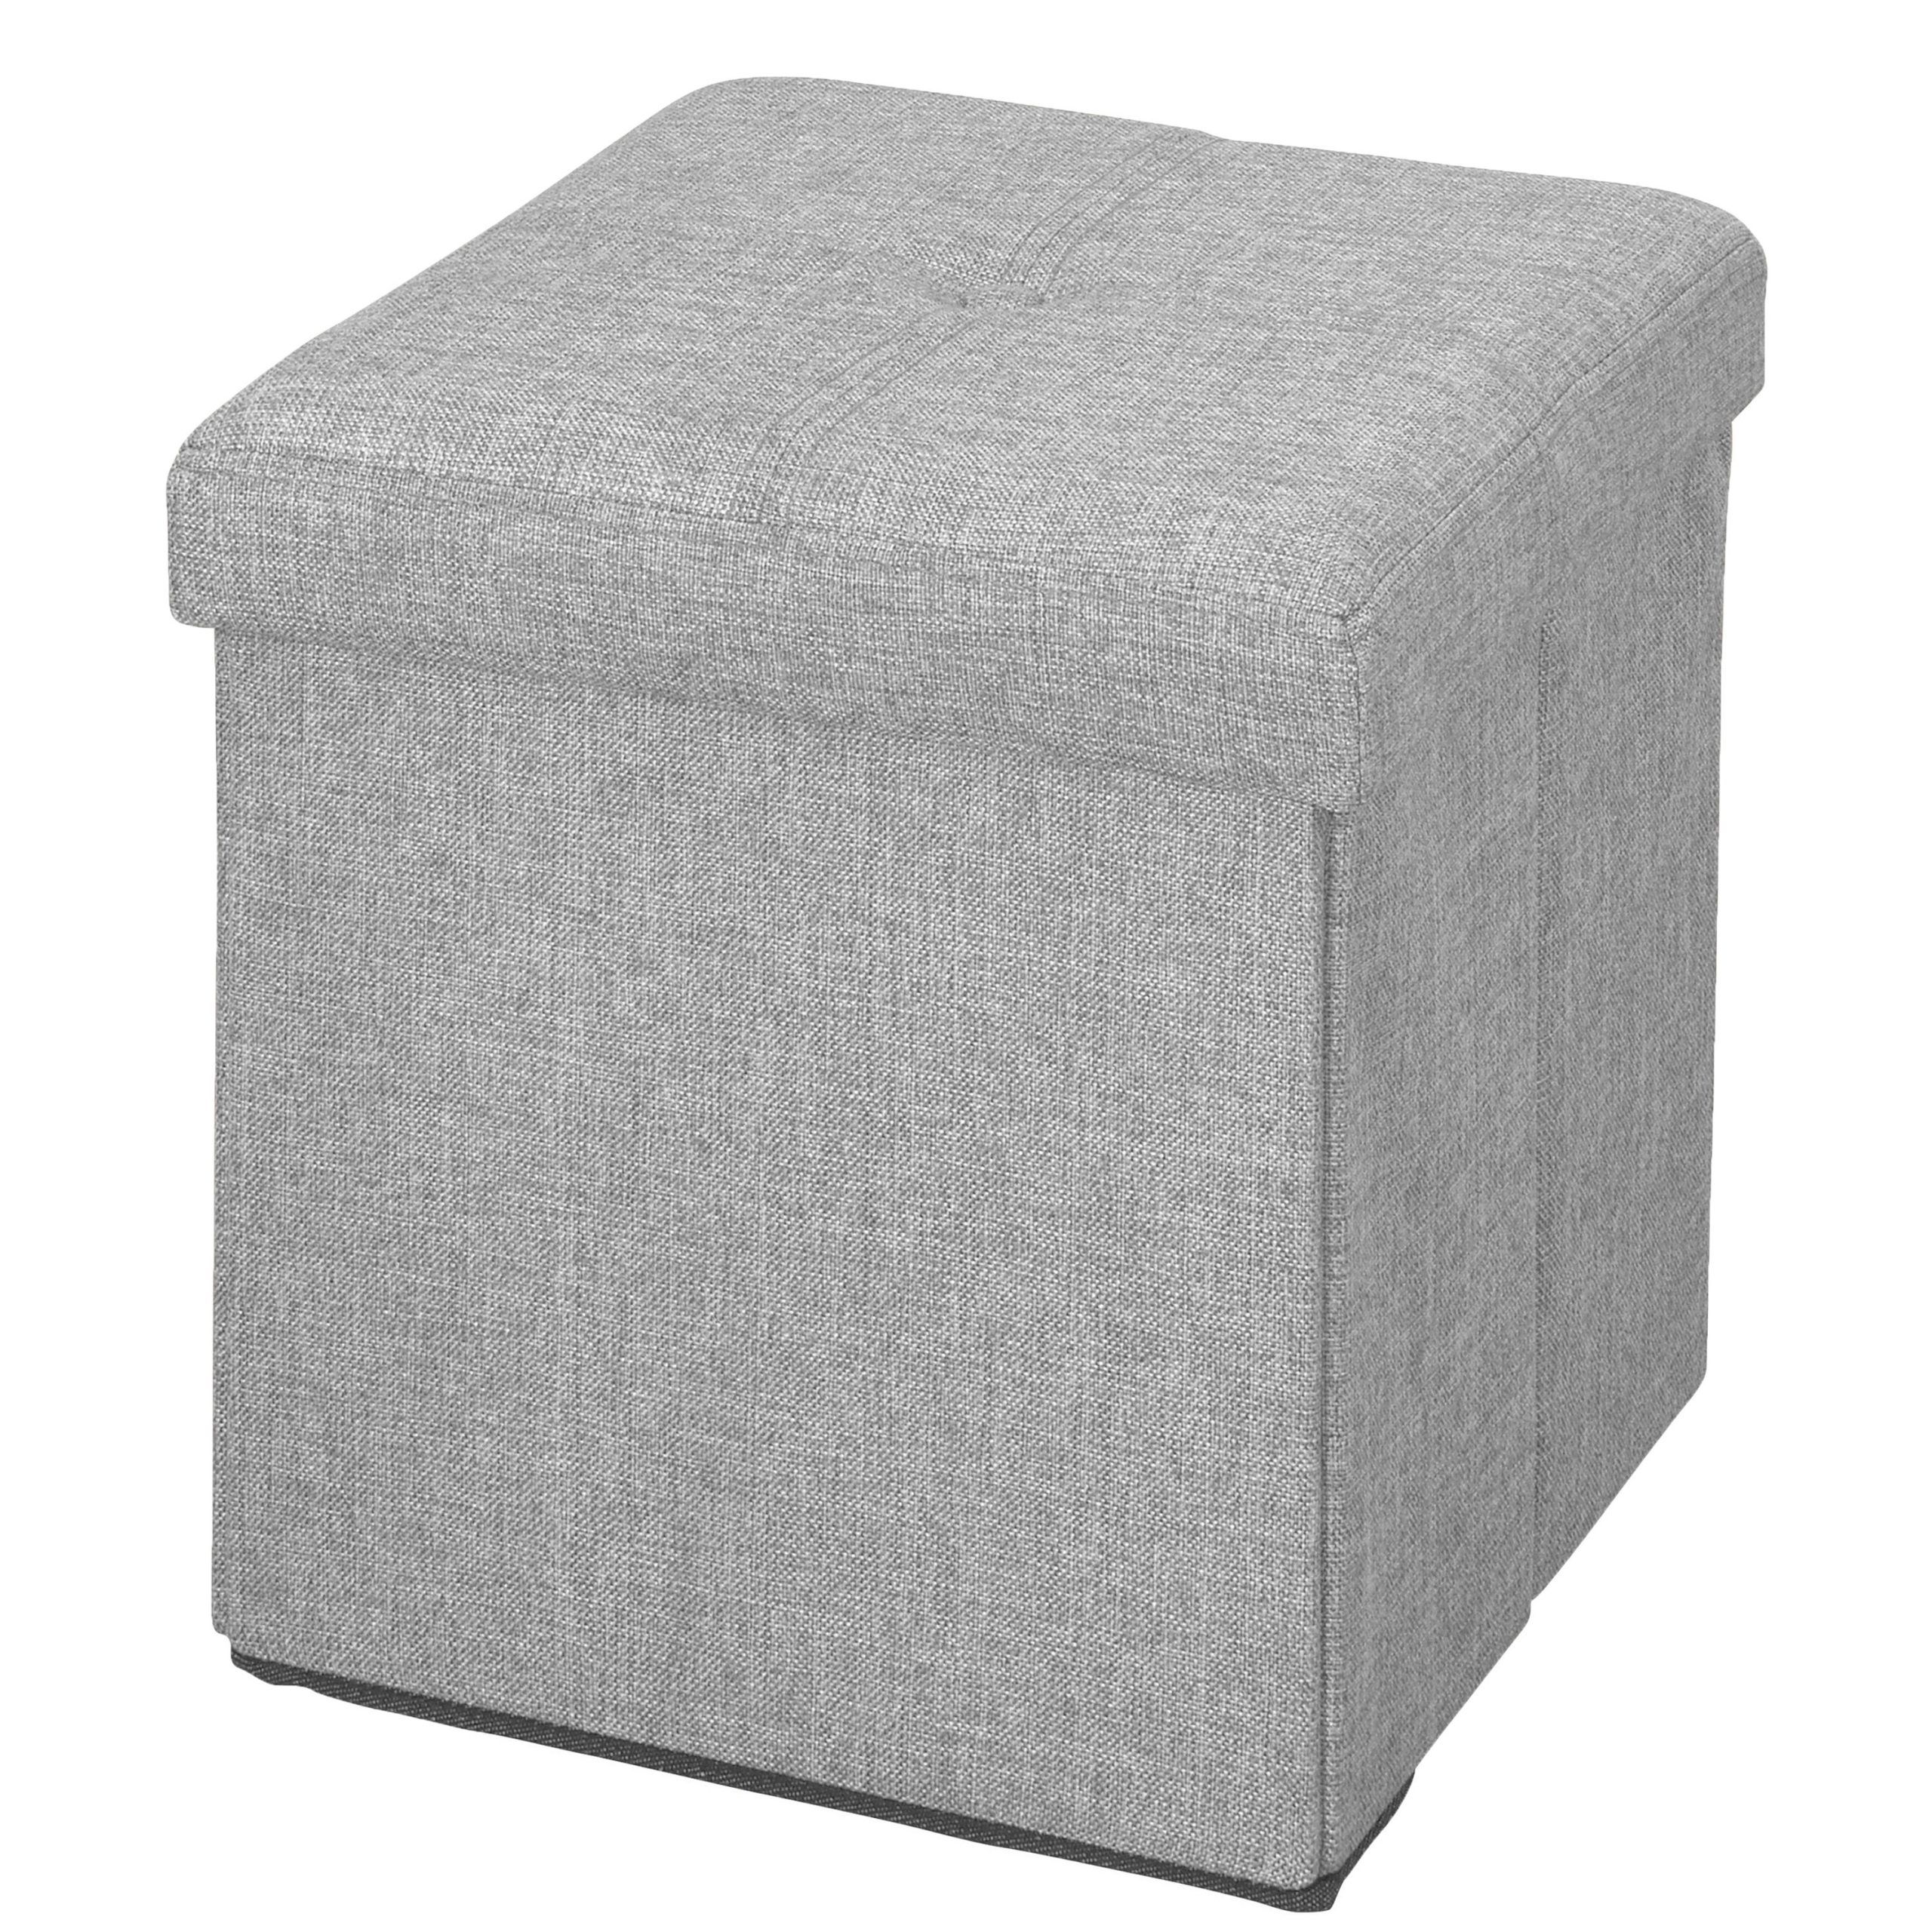 2018 Simplify Faux Linen Folding Storage Ottoman Cube In Natural – Walmart For Solid Linen Cube Ottomans (View 9 of 10)